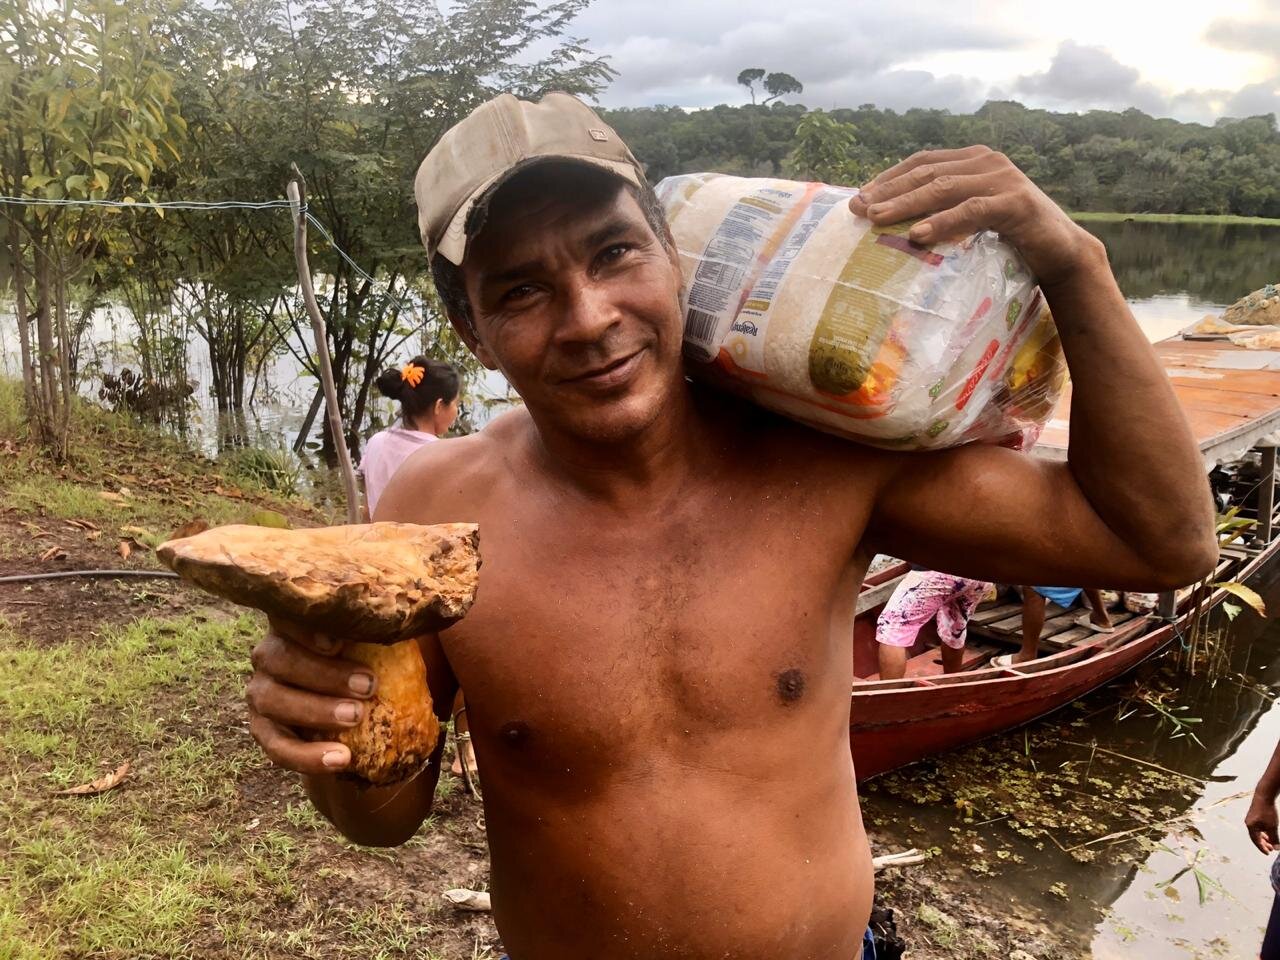 Brazil May-Distribuition of good and home items along the Amazon River 4.jpeg